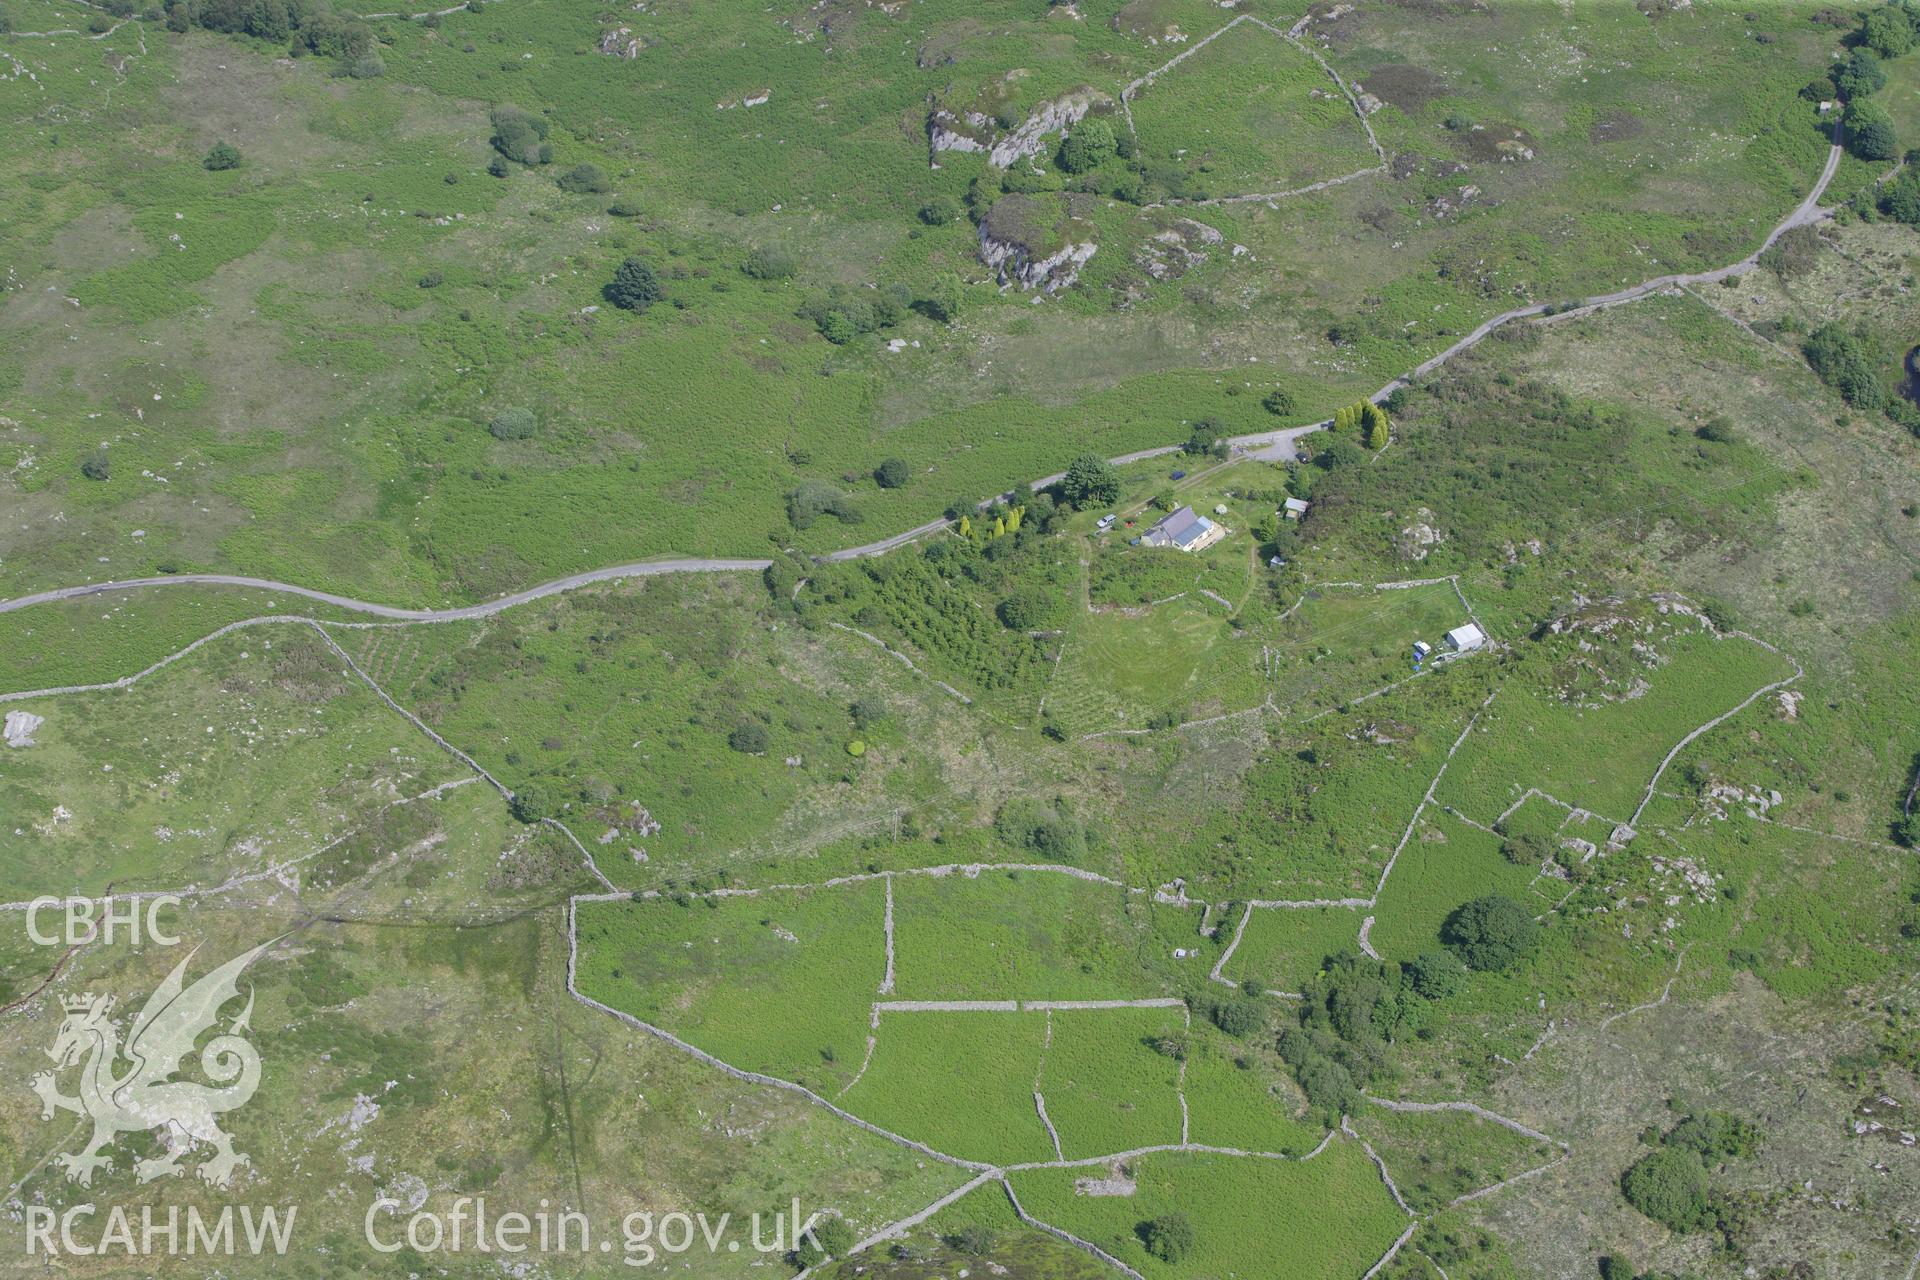 RCAHMW colour oblique aerial photograph of a hut group near Galltycelyn, south of Cwm-y-Glo. Taken on 16 June 2009 by Toby Driver